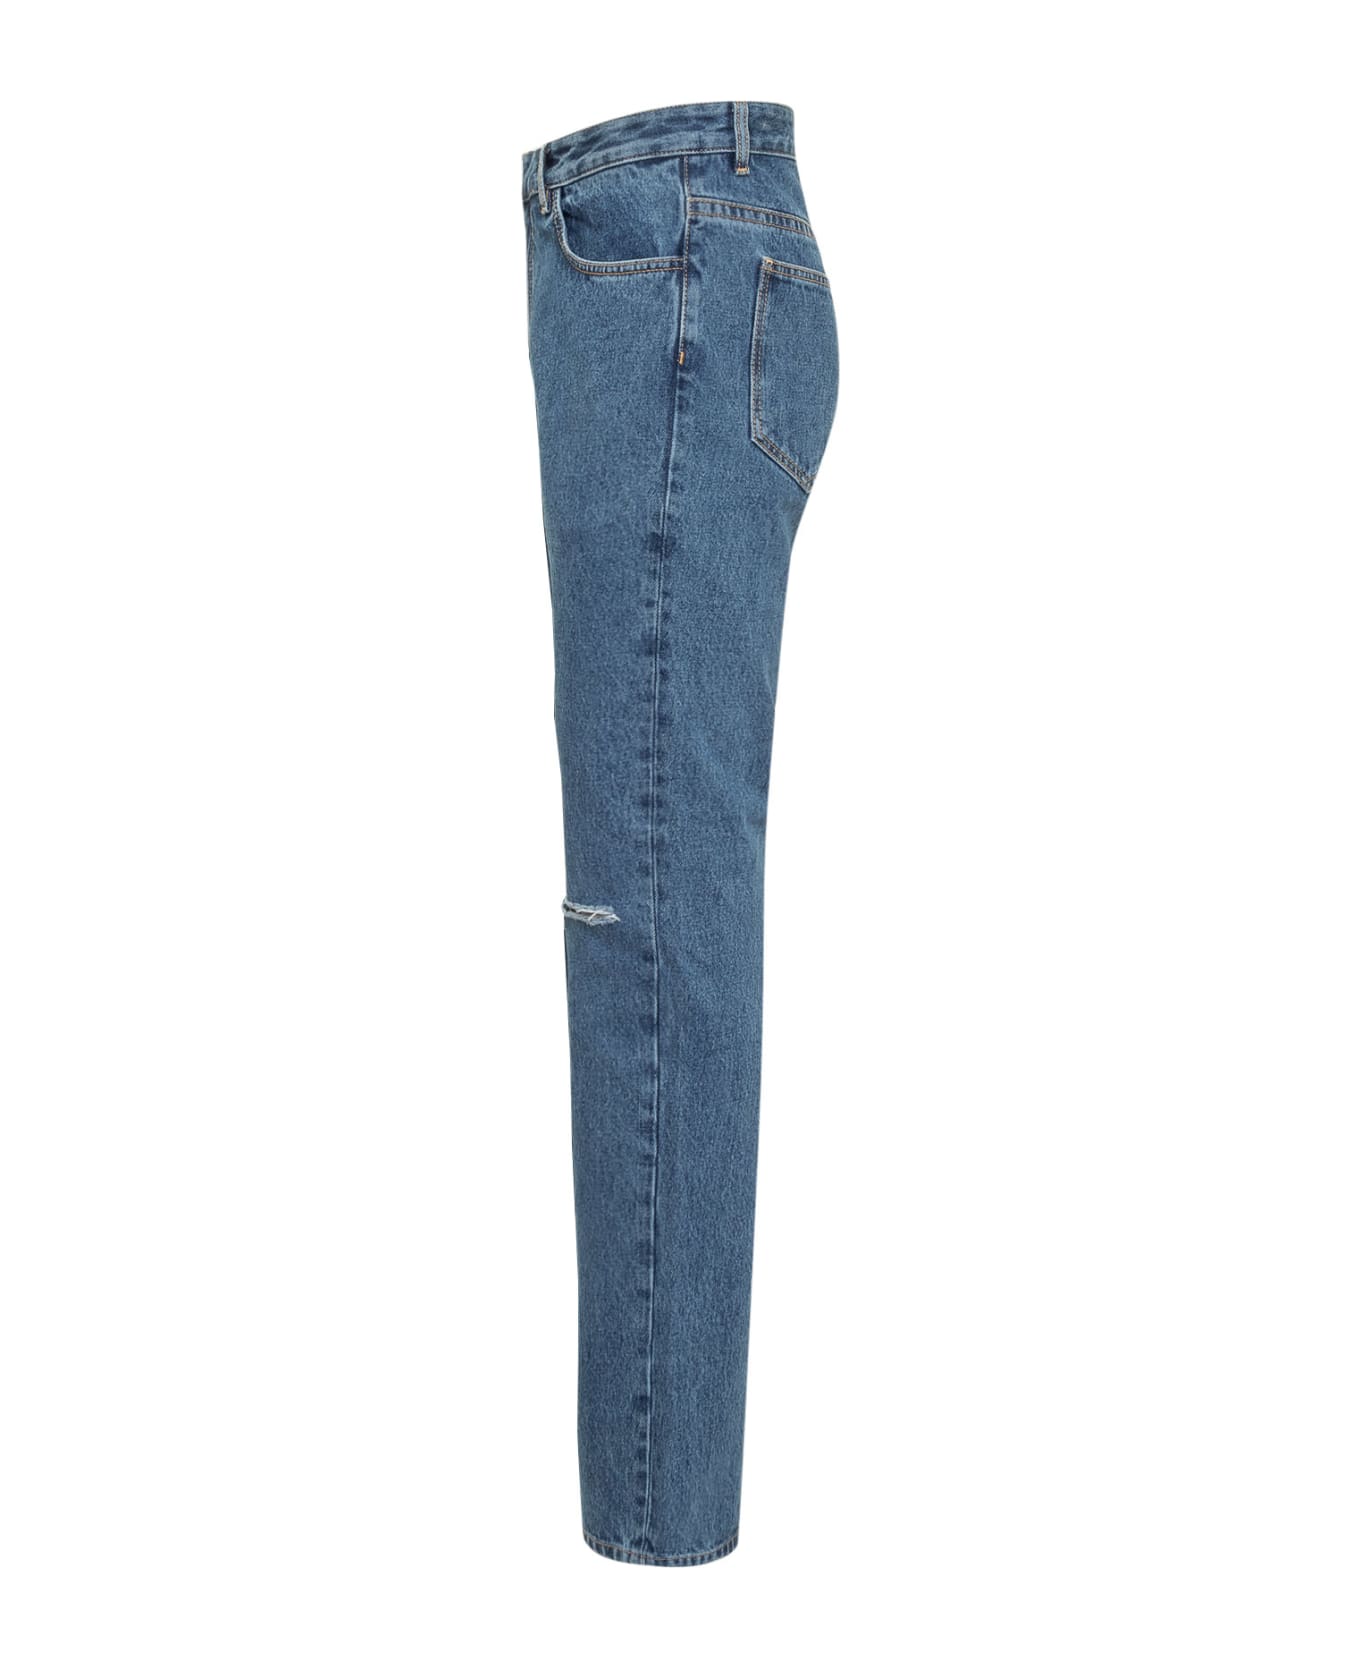 Givenchy Jeans With Zip And Rips Details - INDIGO BLUE